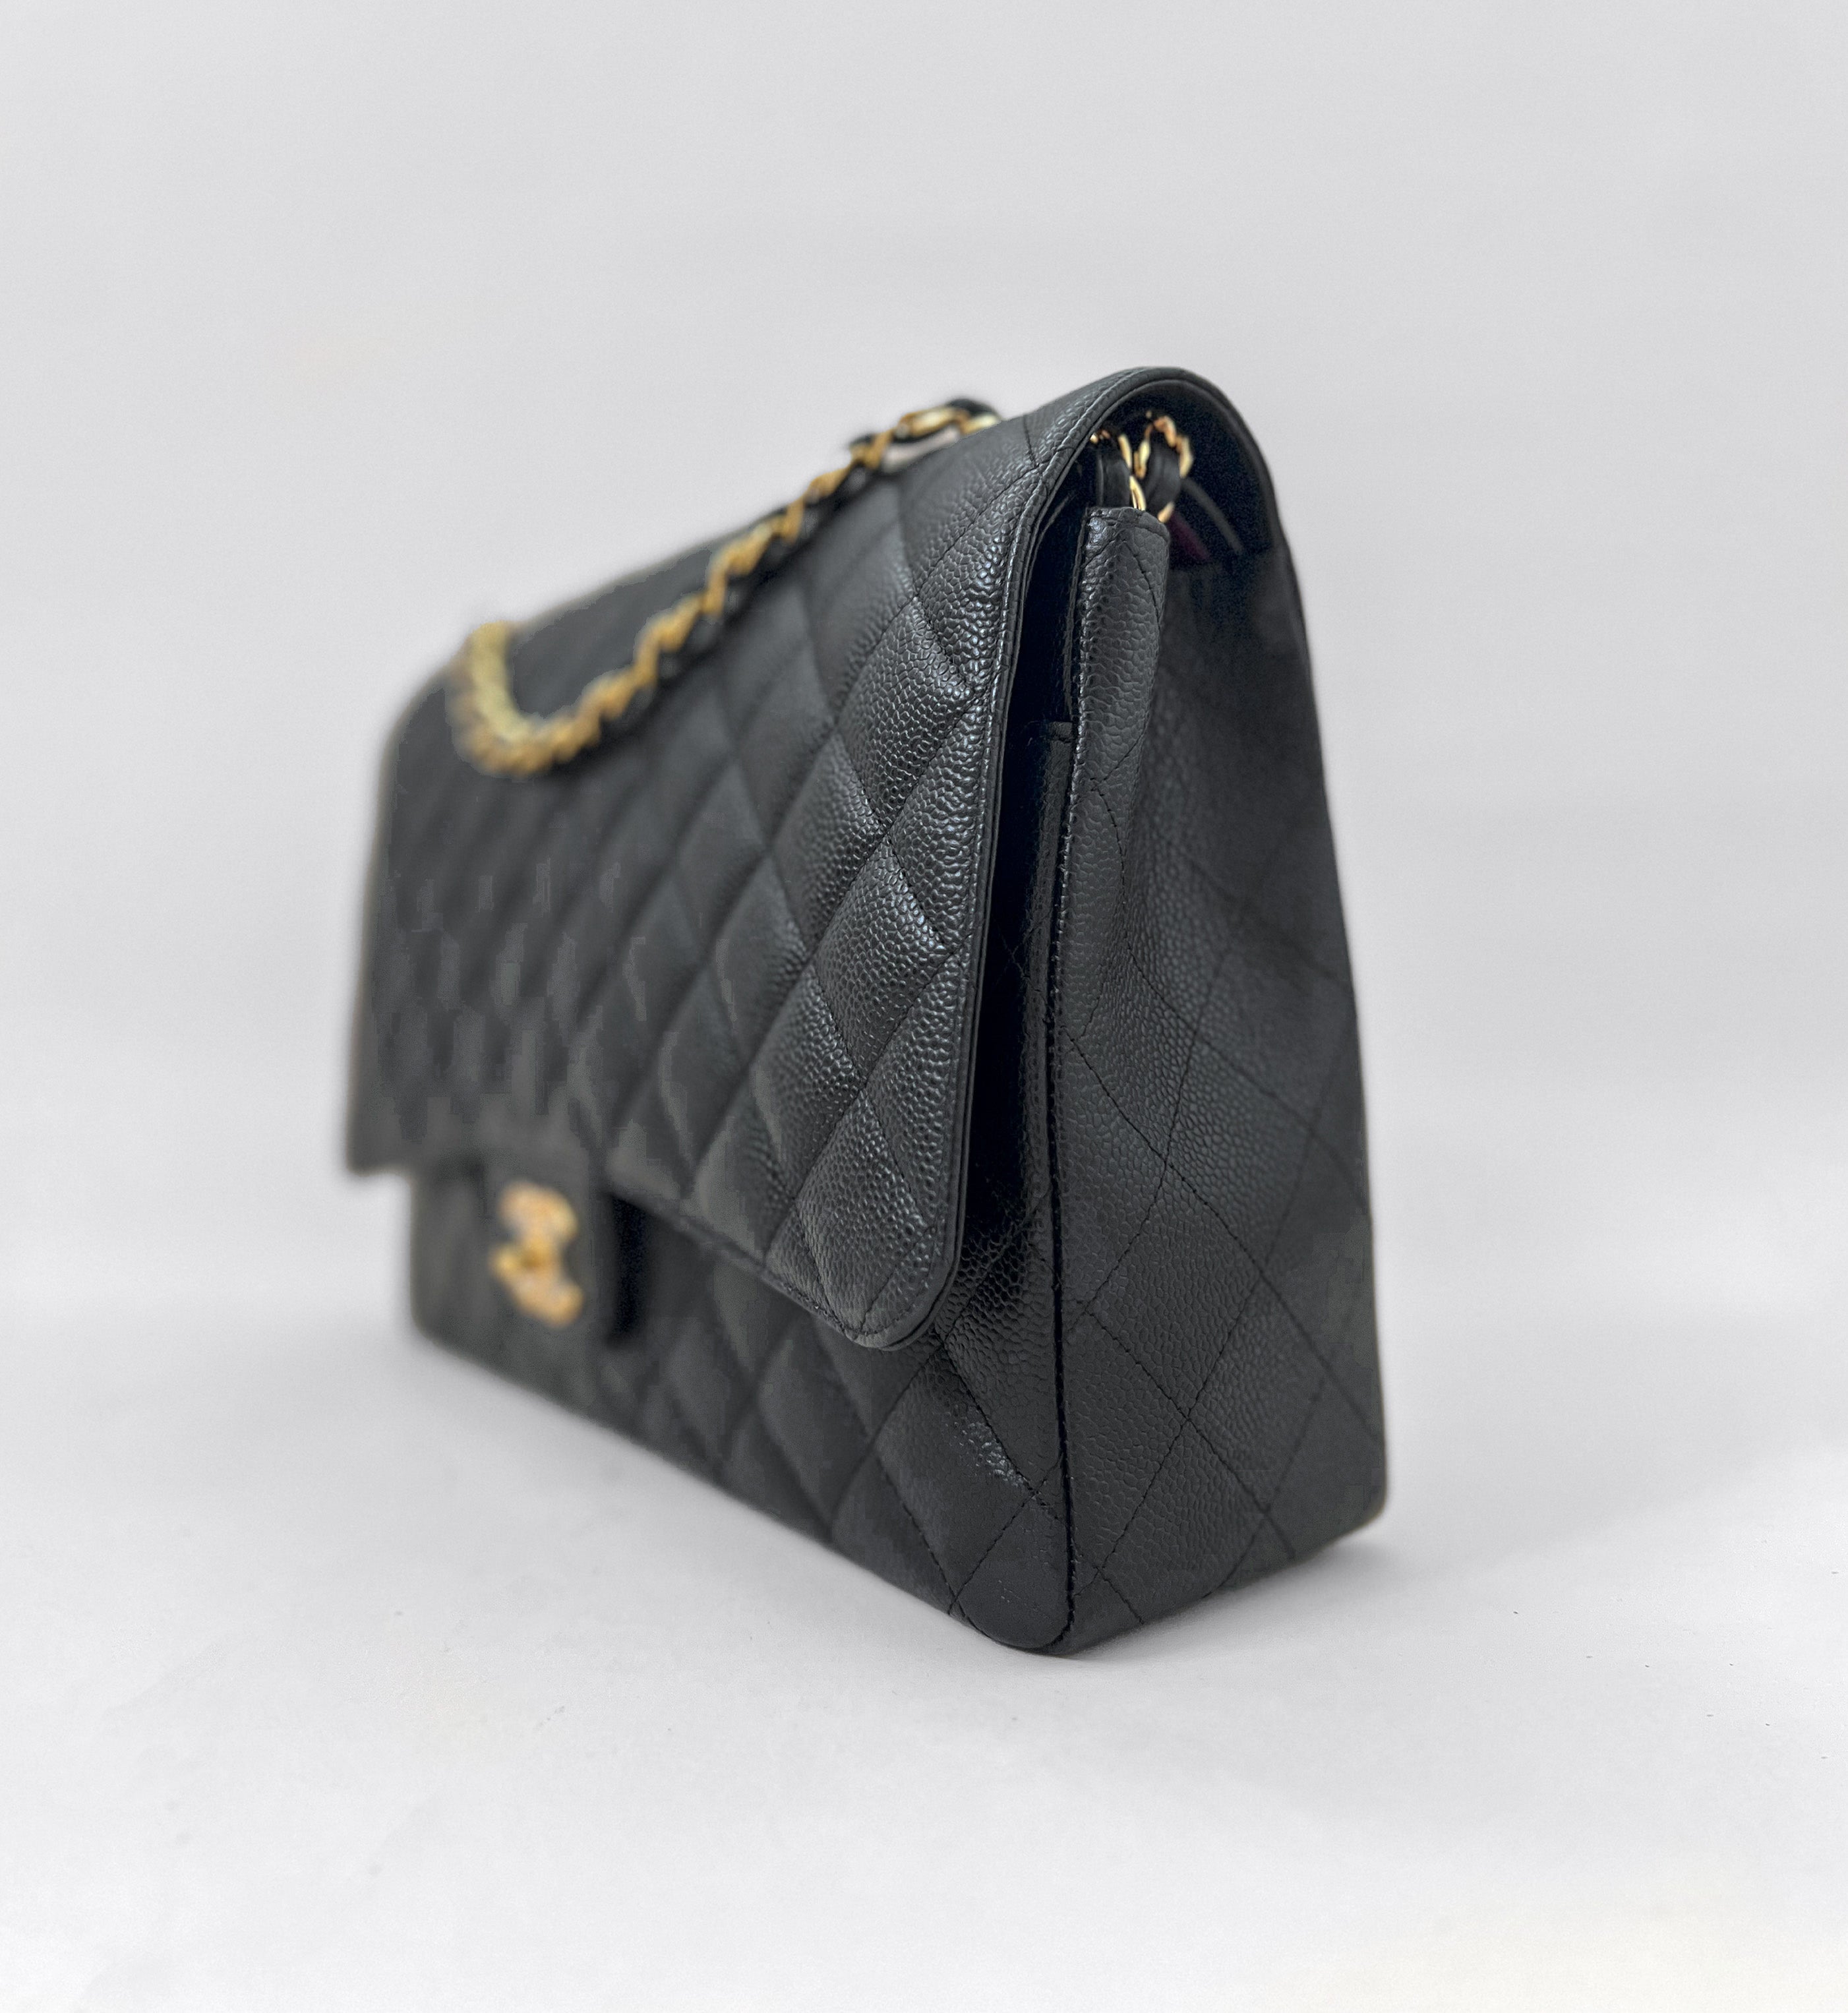 Maxi Classic Double Flap in Black Caviar with GHW